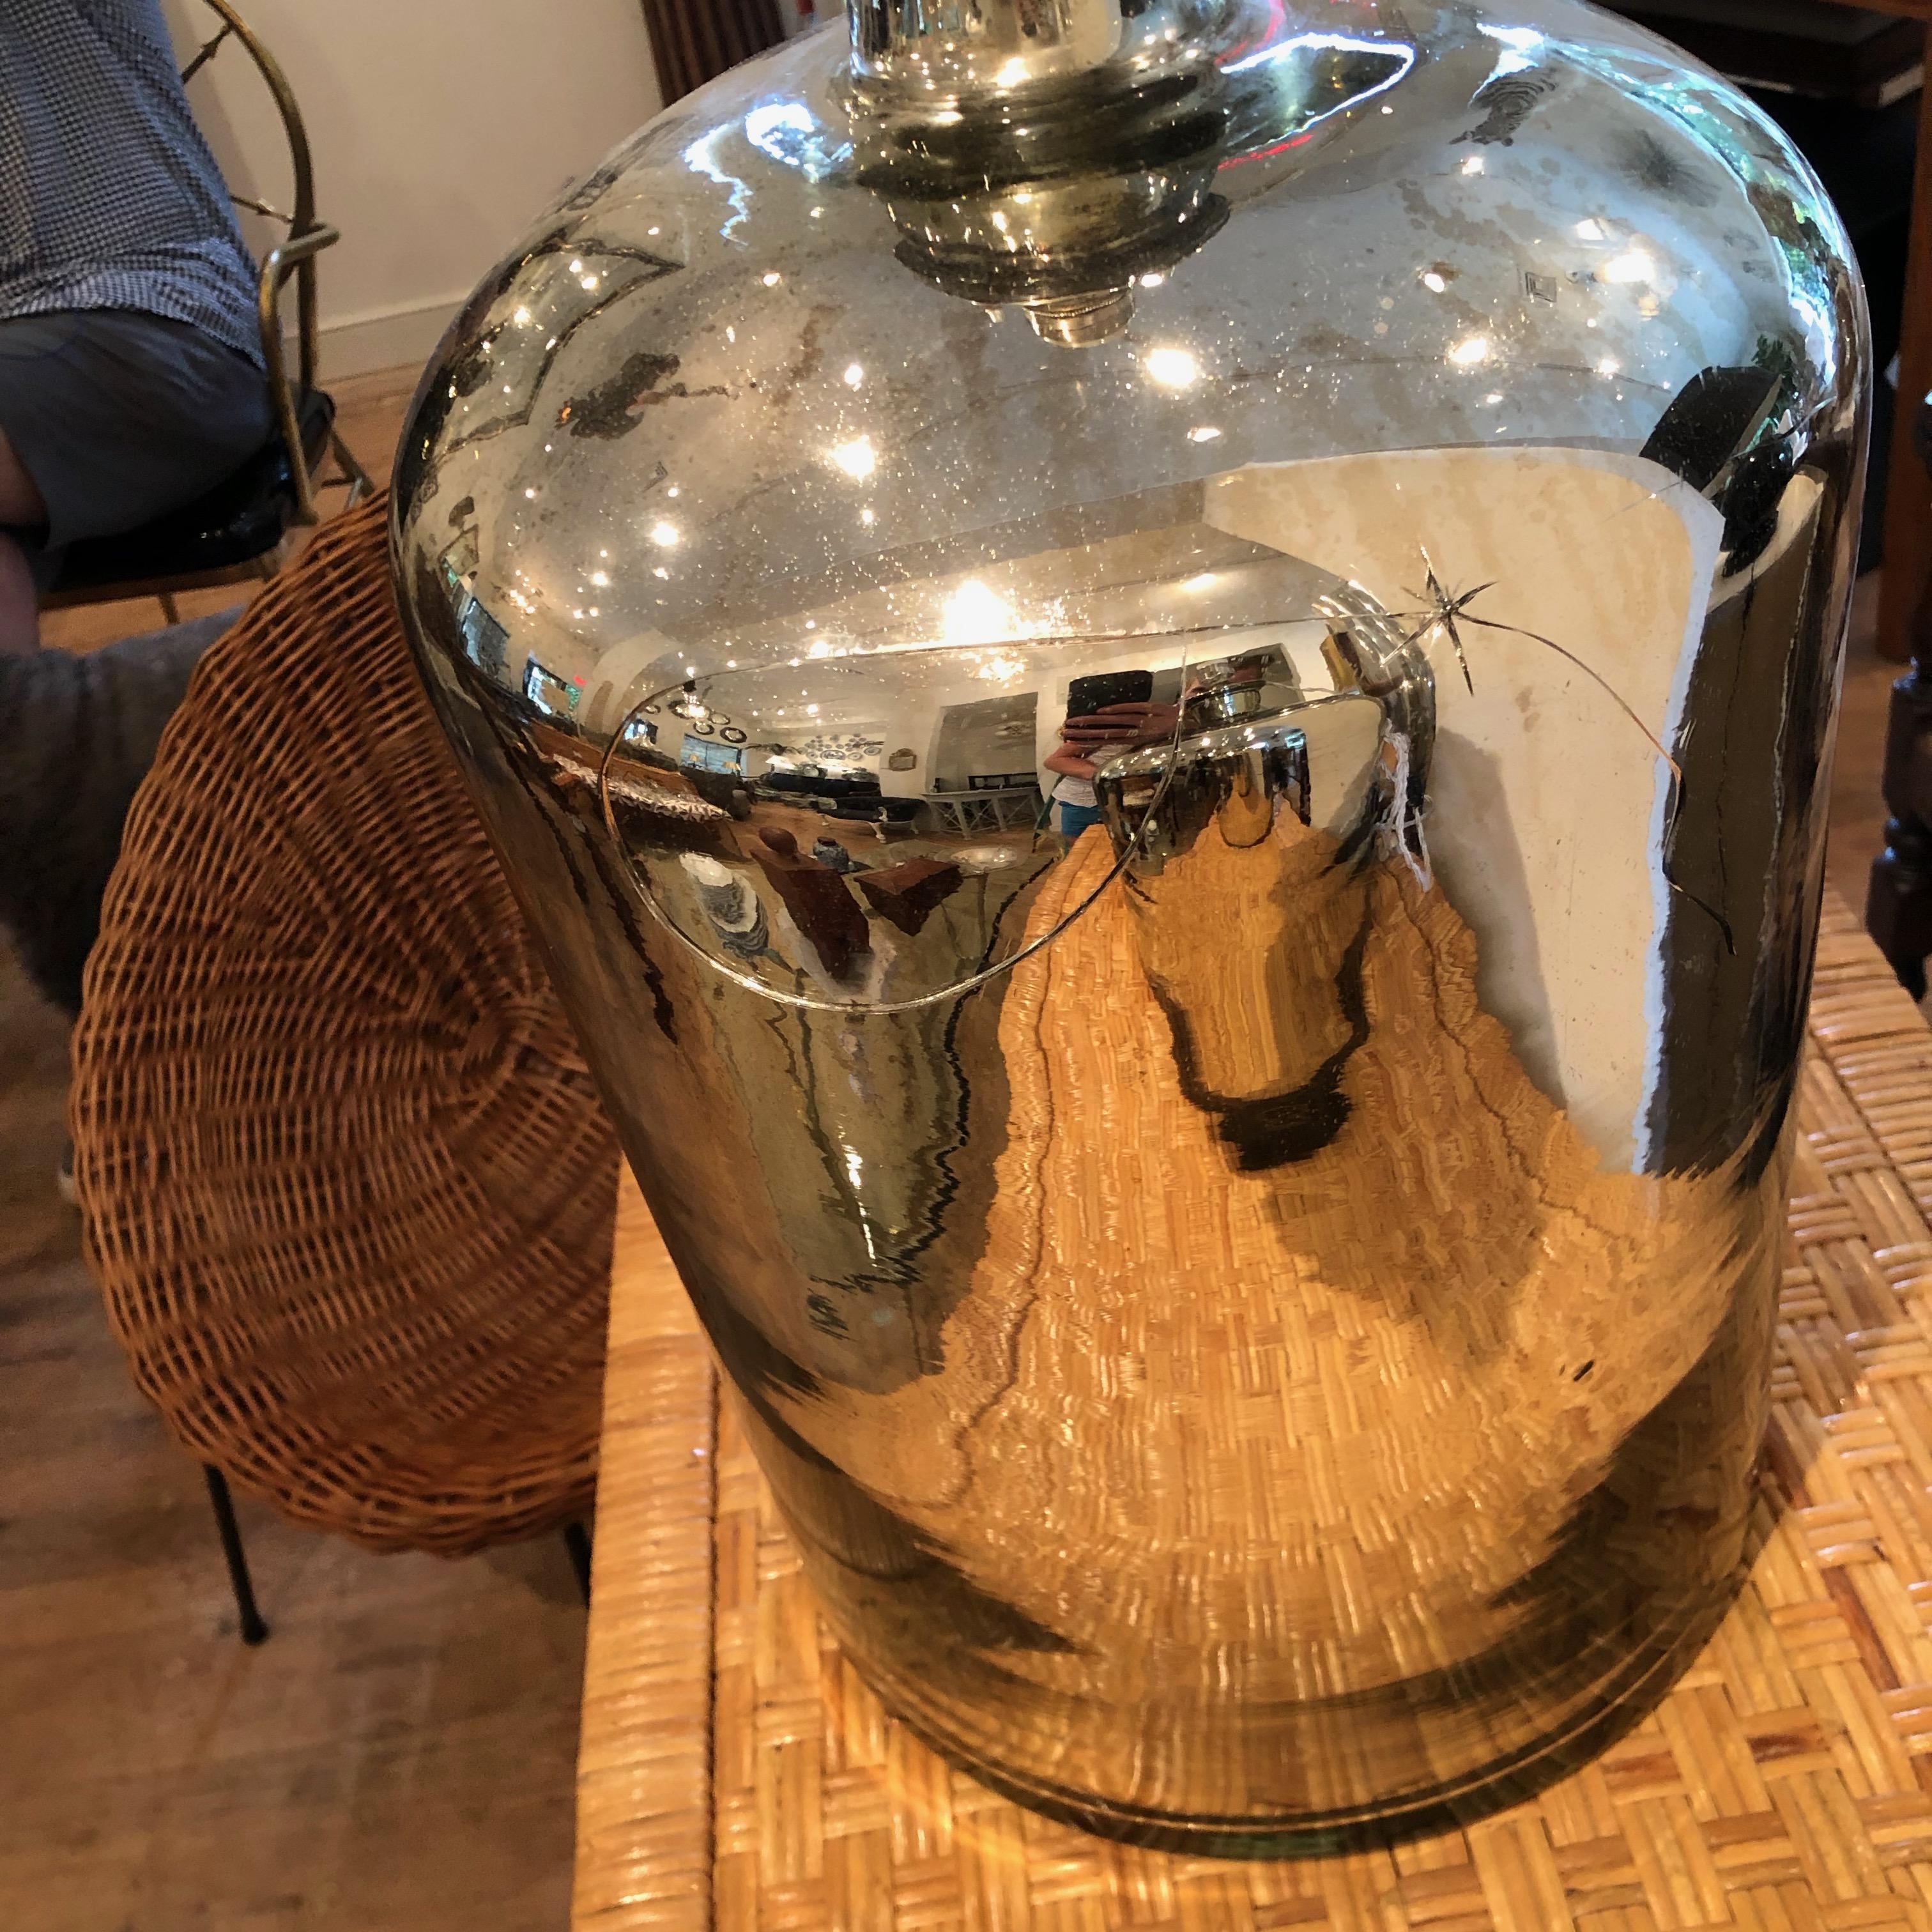 Pair of large Mercury glass table lamps.

One of the lamps has a crack, it has been repaired (sealed).